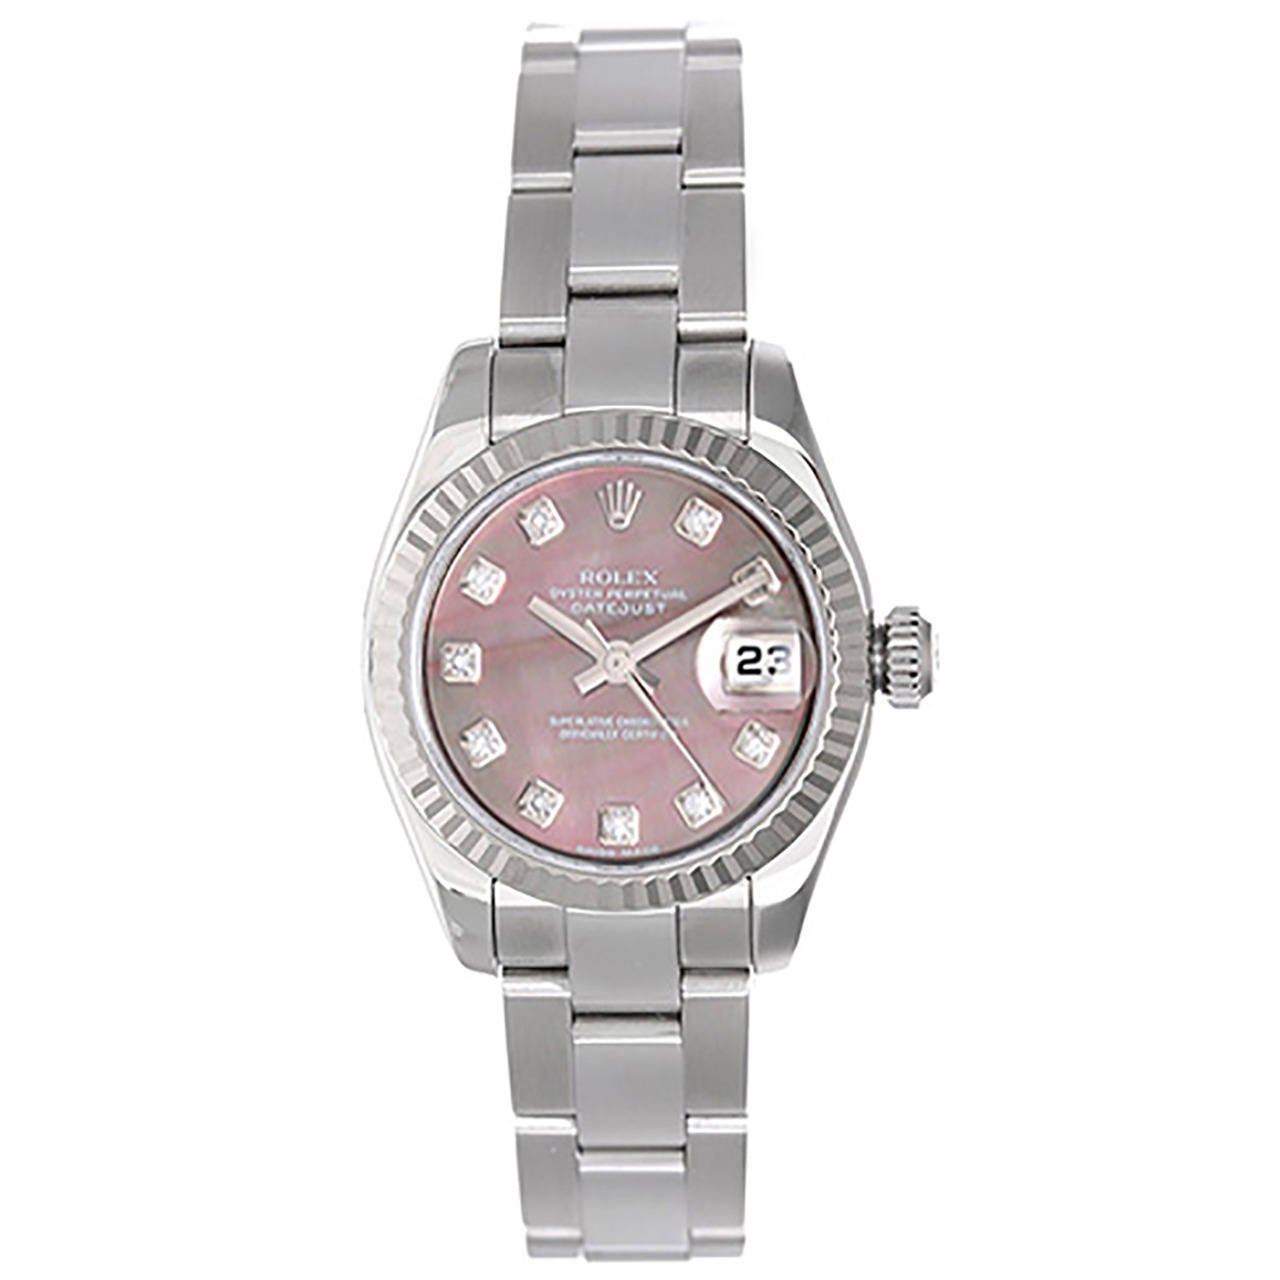 Rolex Lady's White Gold Datejust Wristwatch Ref 179179 with Mother-of-Pearl Dial